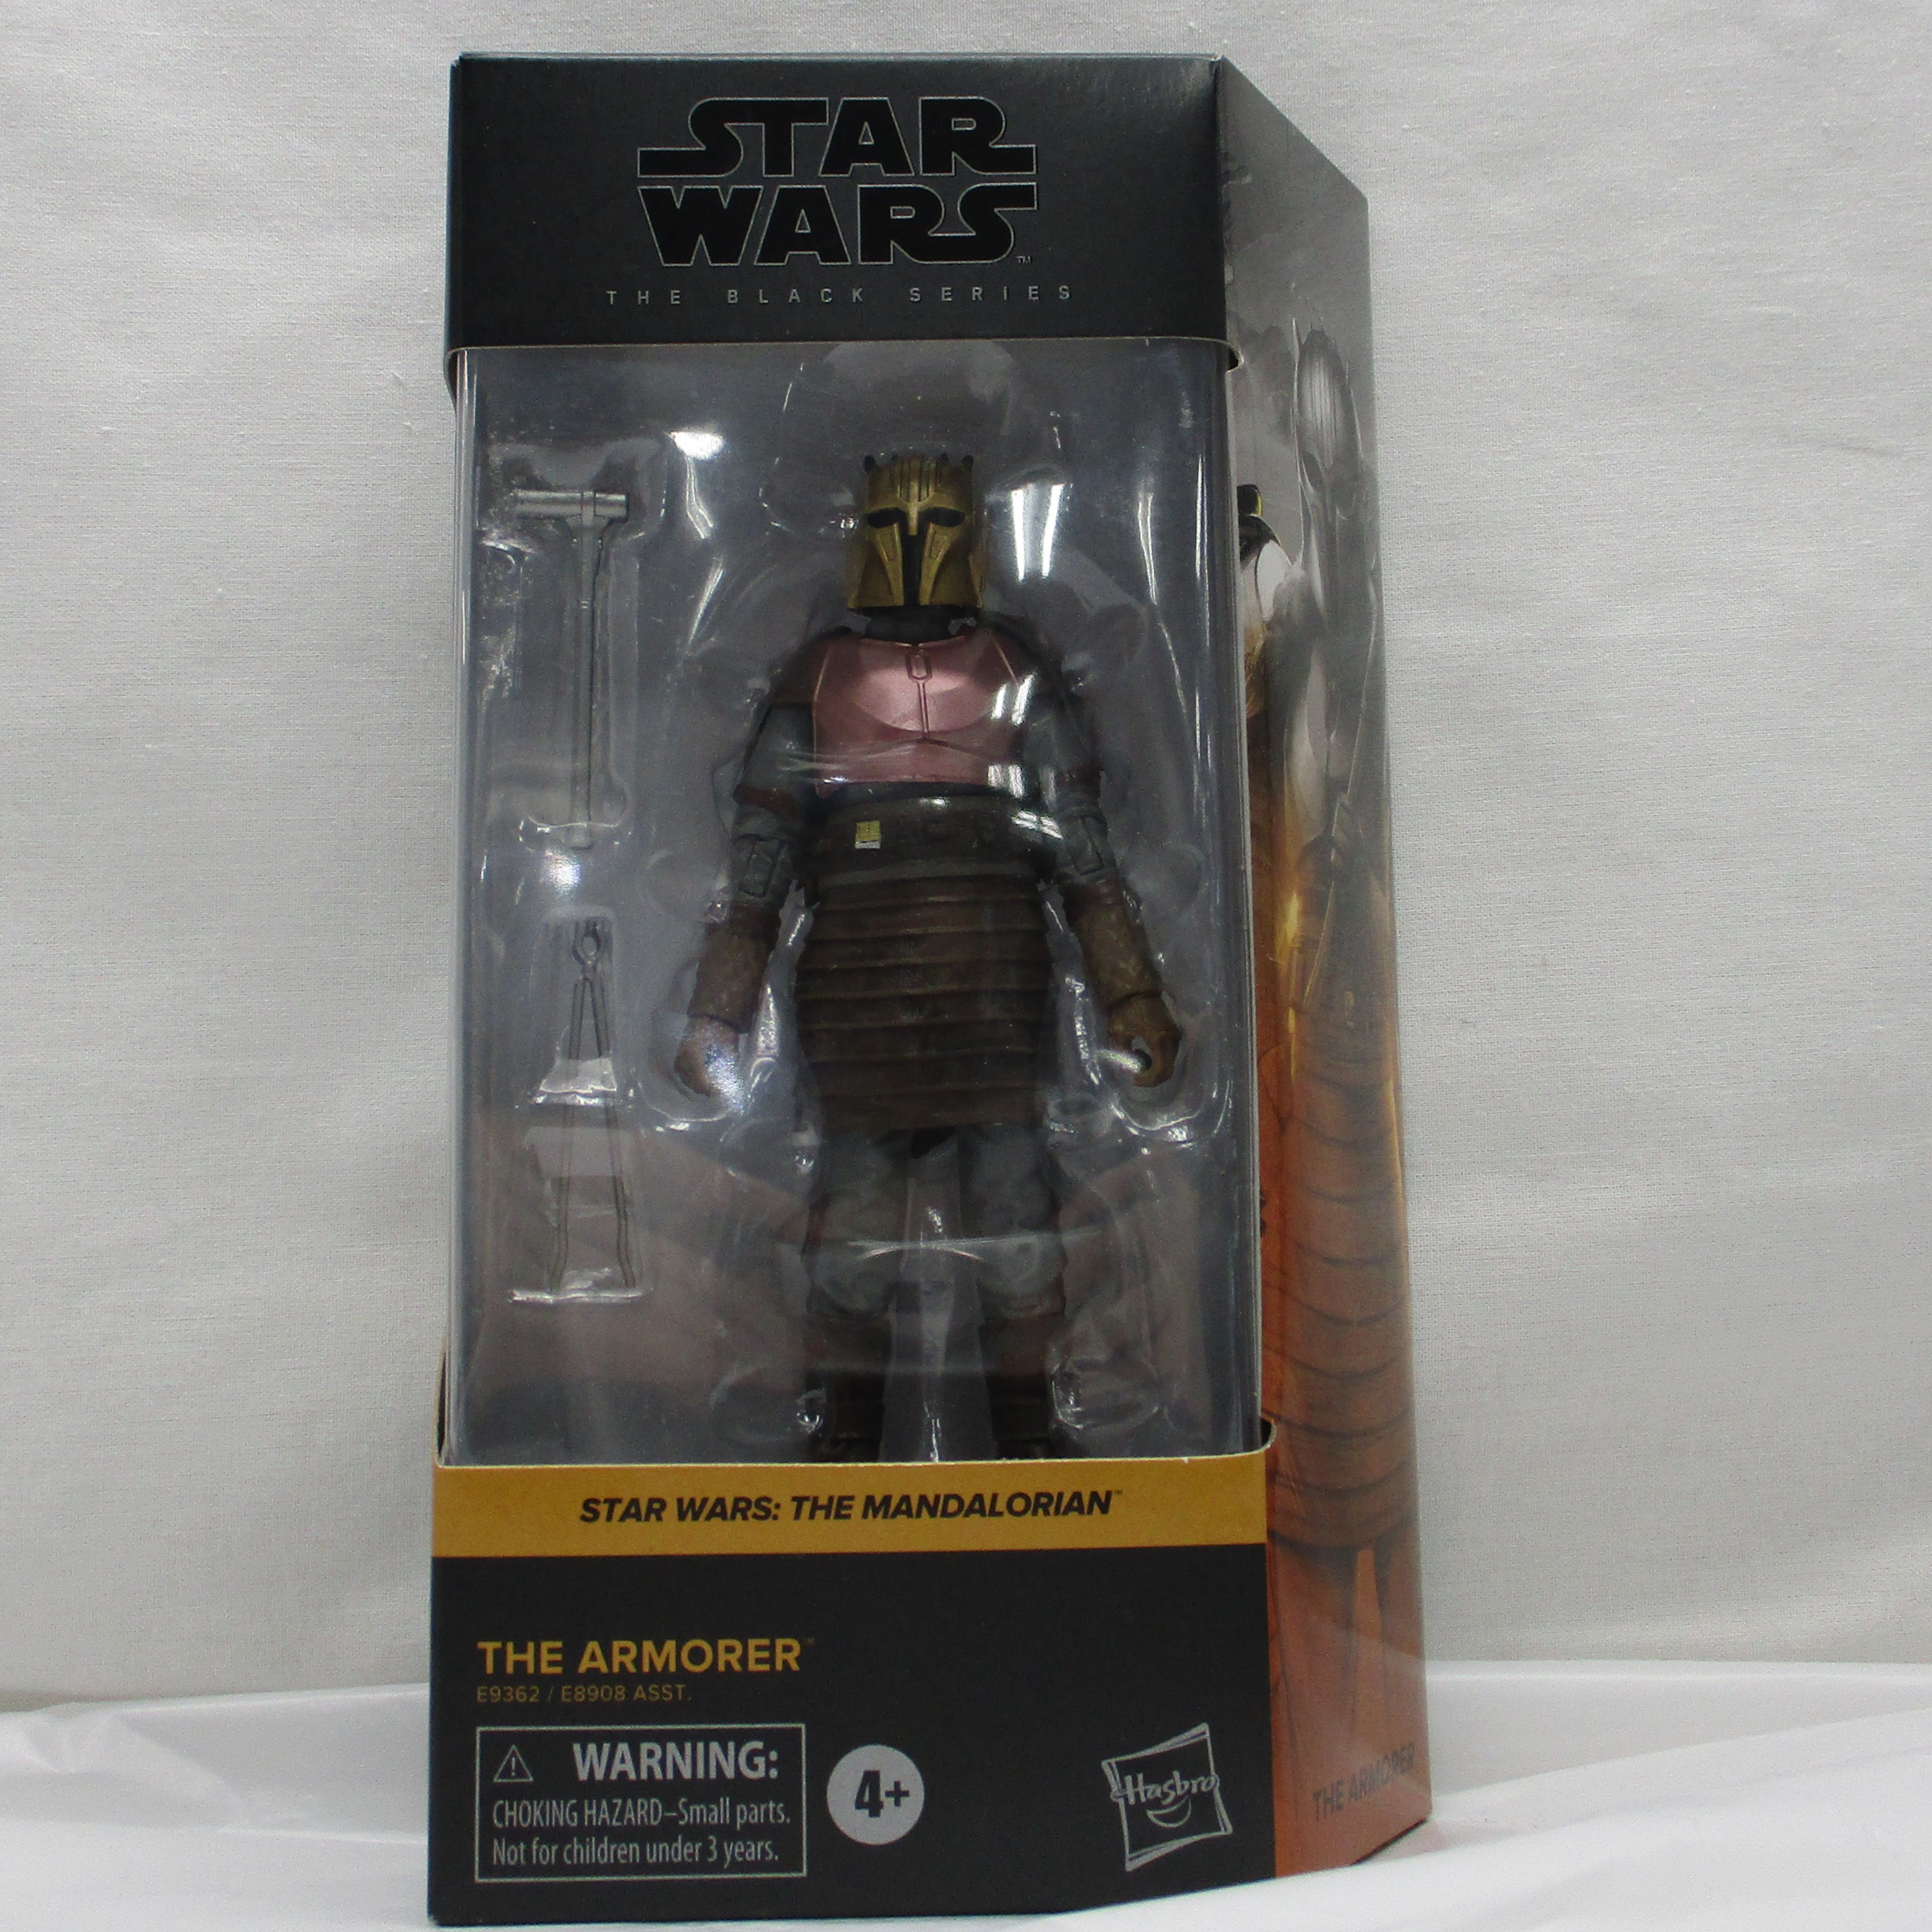 Hasbro STAR WARS Black Sriese The Armorer 6inchi Action Figure